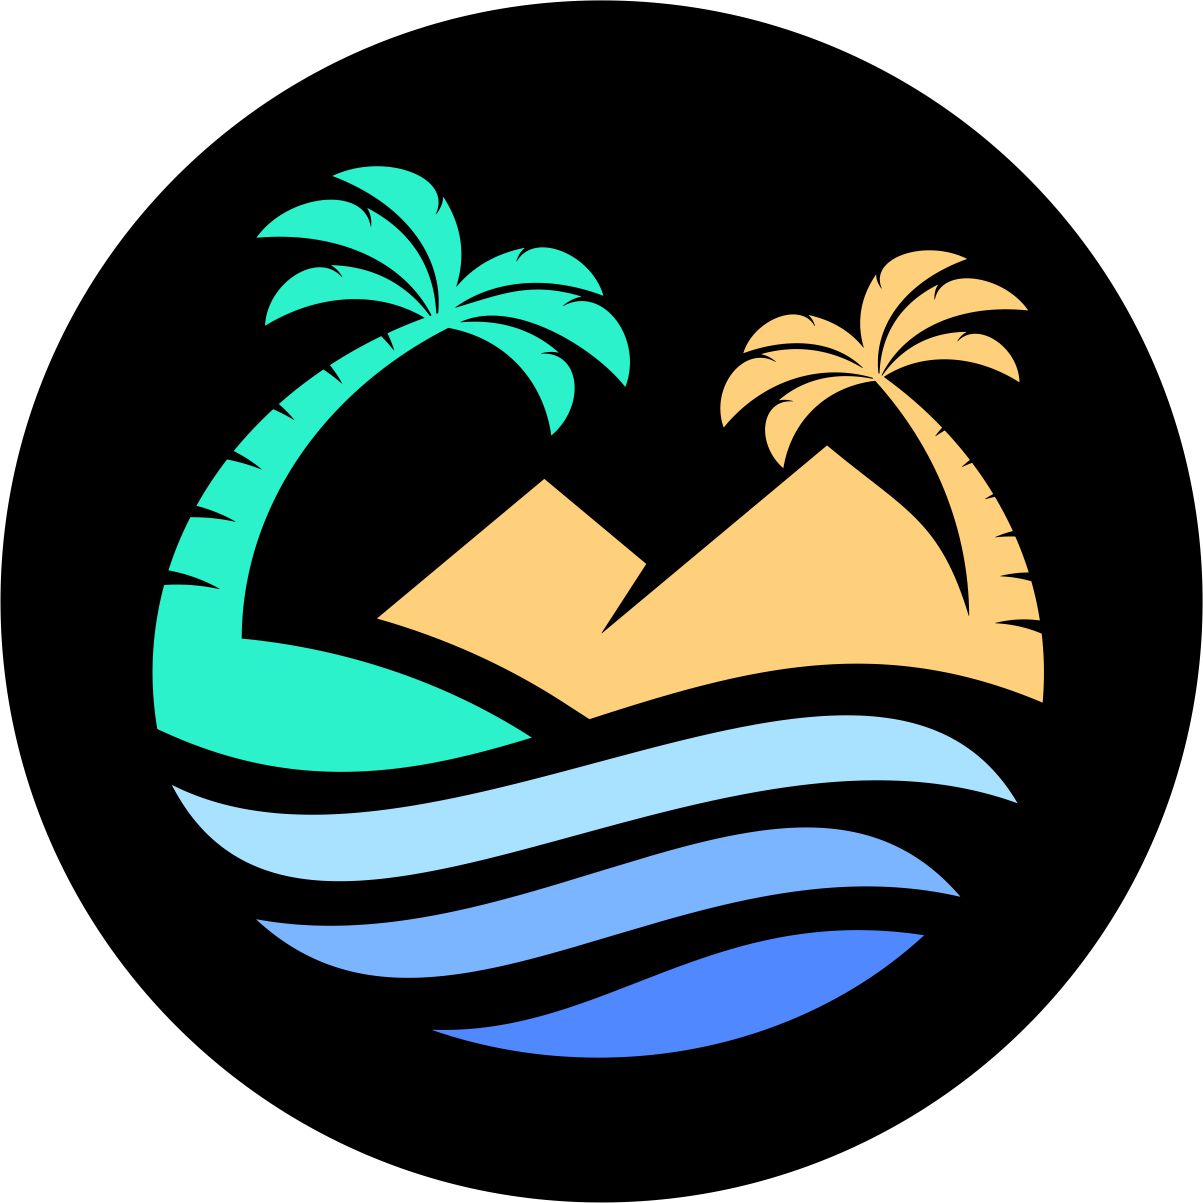 Simple & unique spare tire cover design of a tropical beach scene as silhouettes. Palm trees, cliffs and the water.